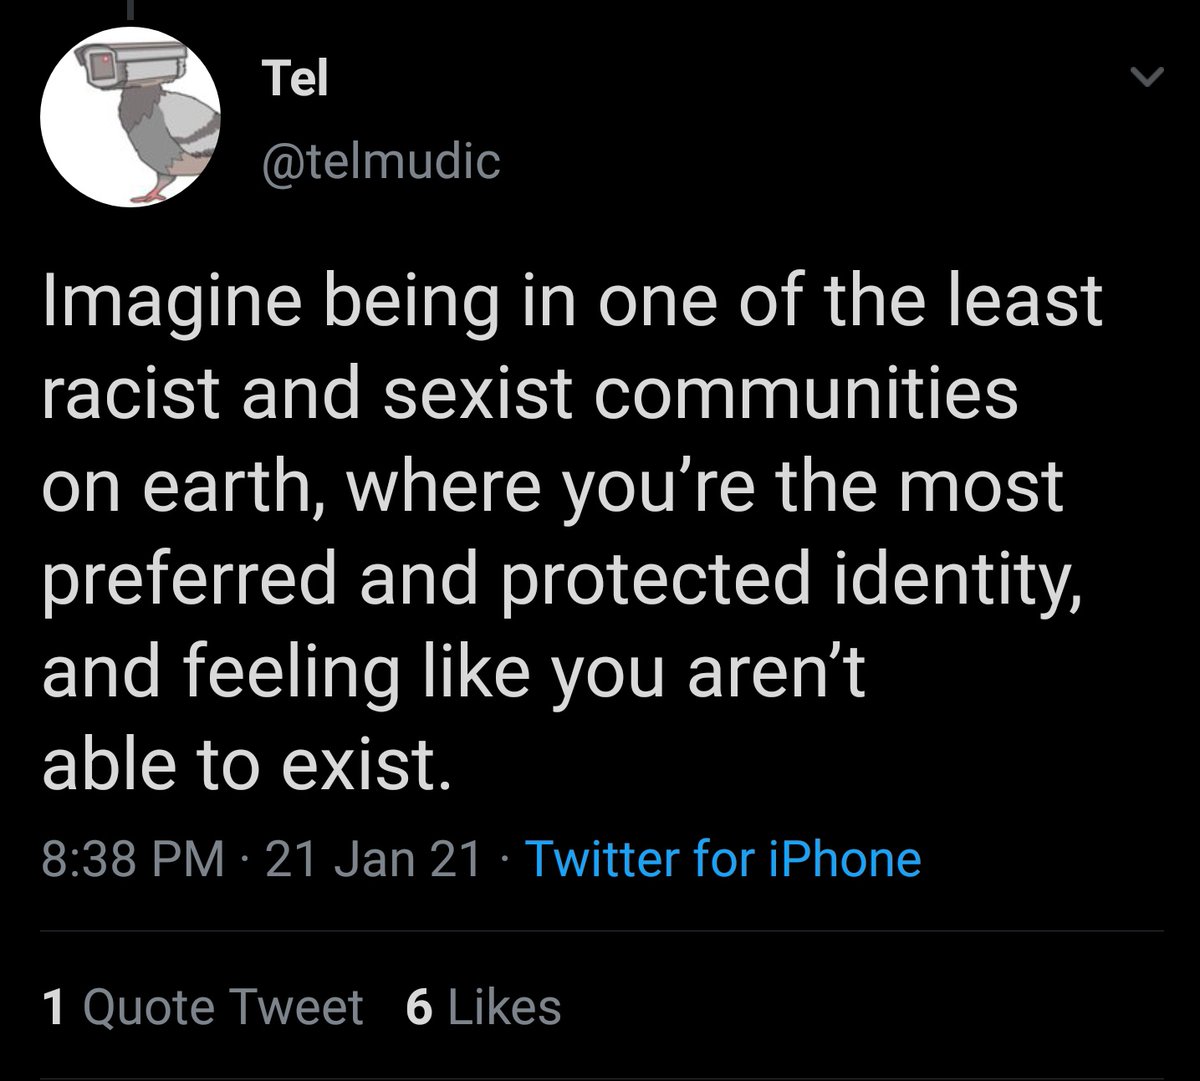 Okay. This is really the last one I'll share. Because I think we can all have a hearty laugh at the idea that the math community is one of the "least racist and sexist communities on earth". 